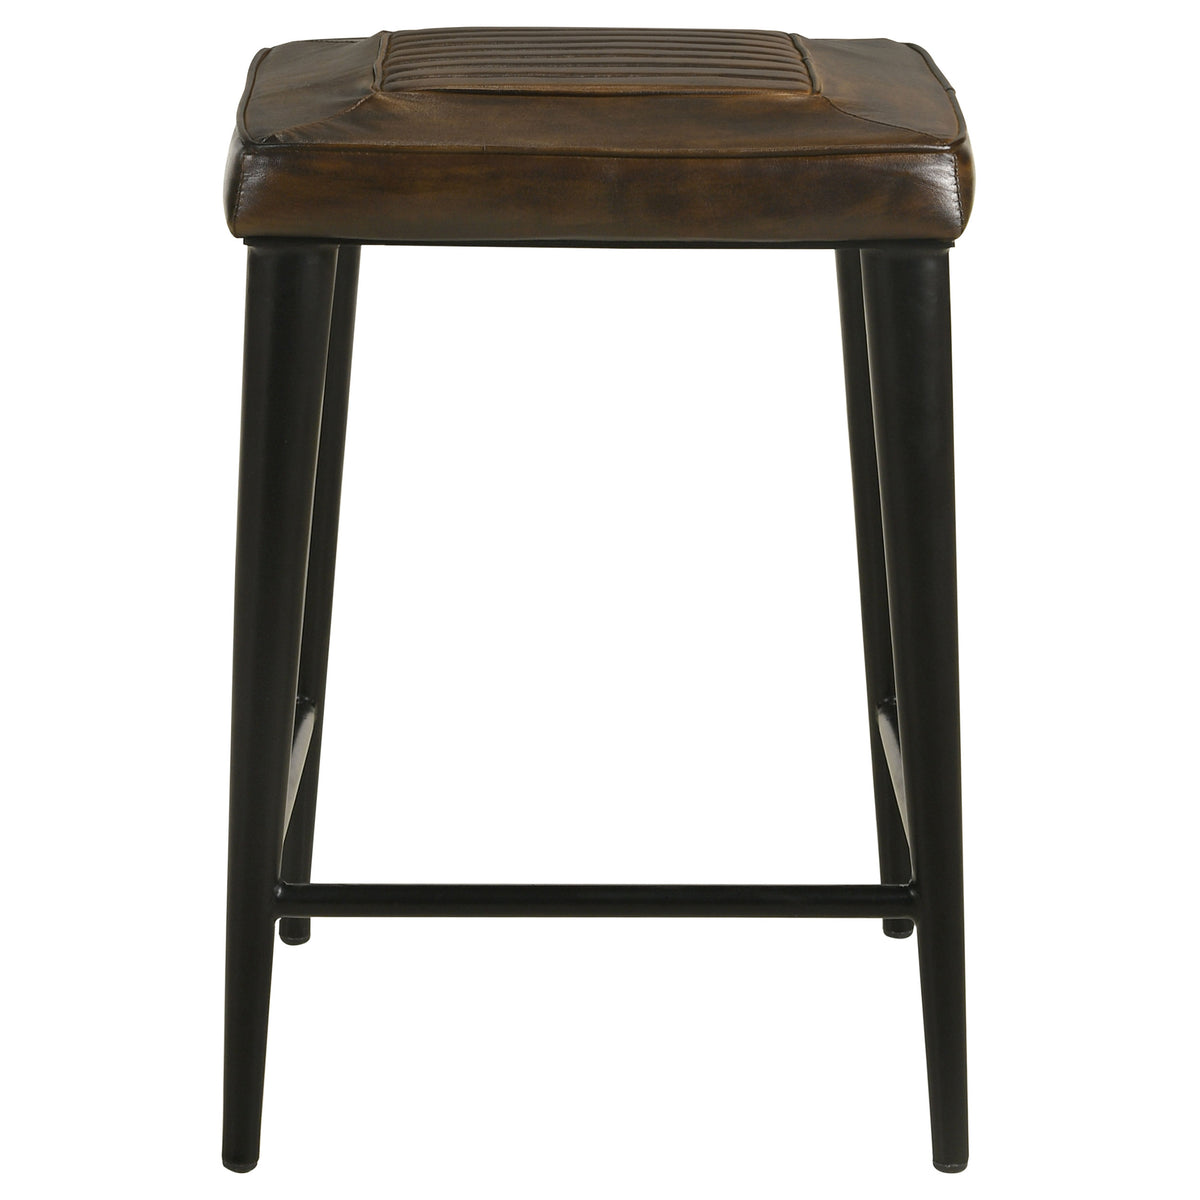 Alvaro Leather Upholstered Backless Counter Height Stool Antique Brown and Black (Set of 2)  Half Price Furniture